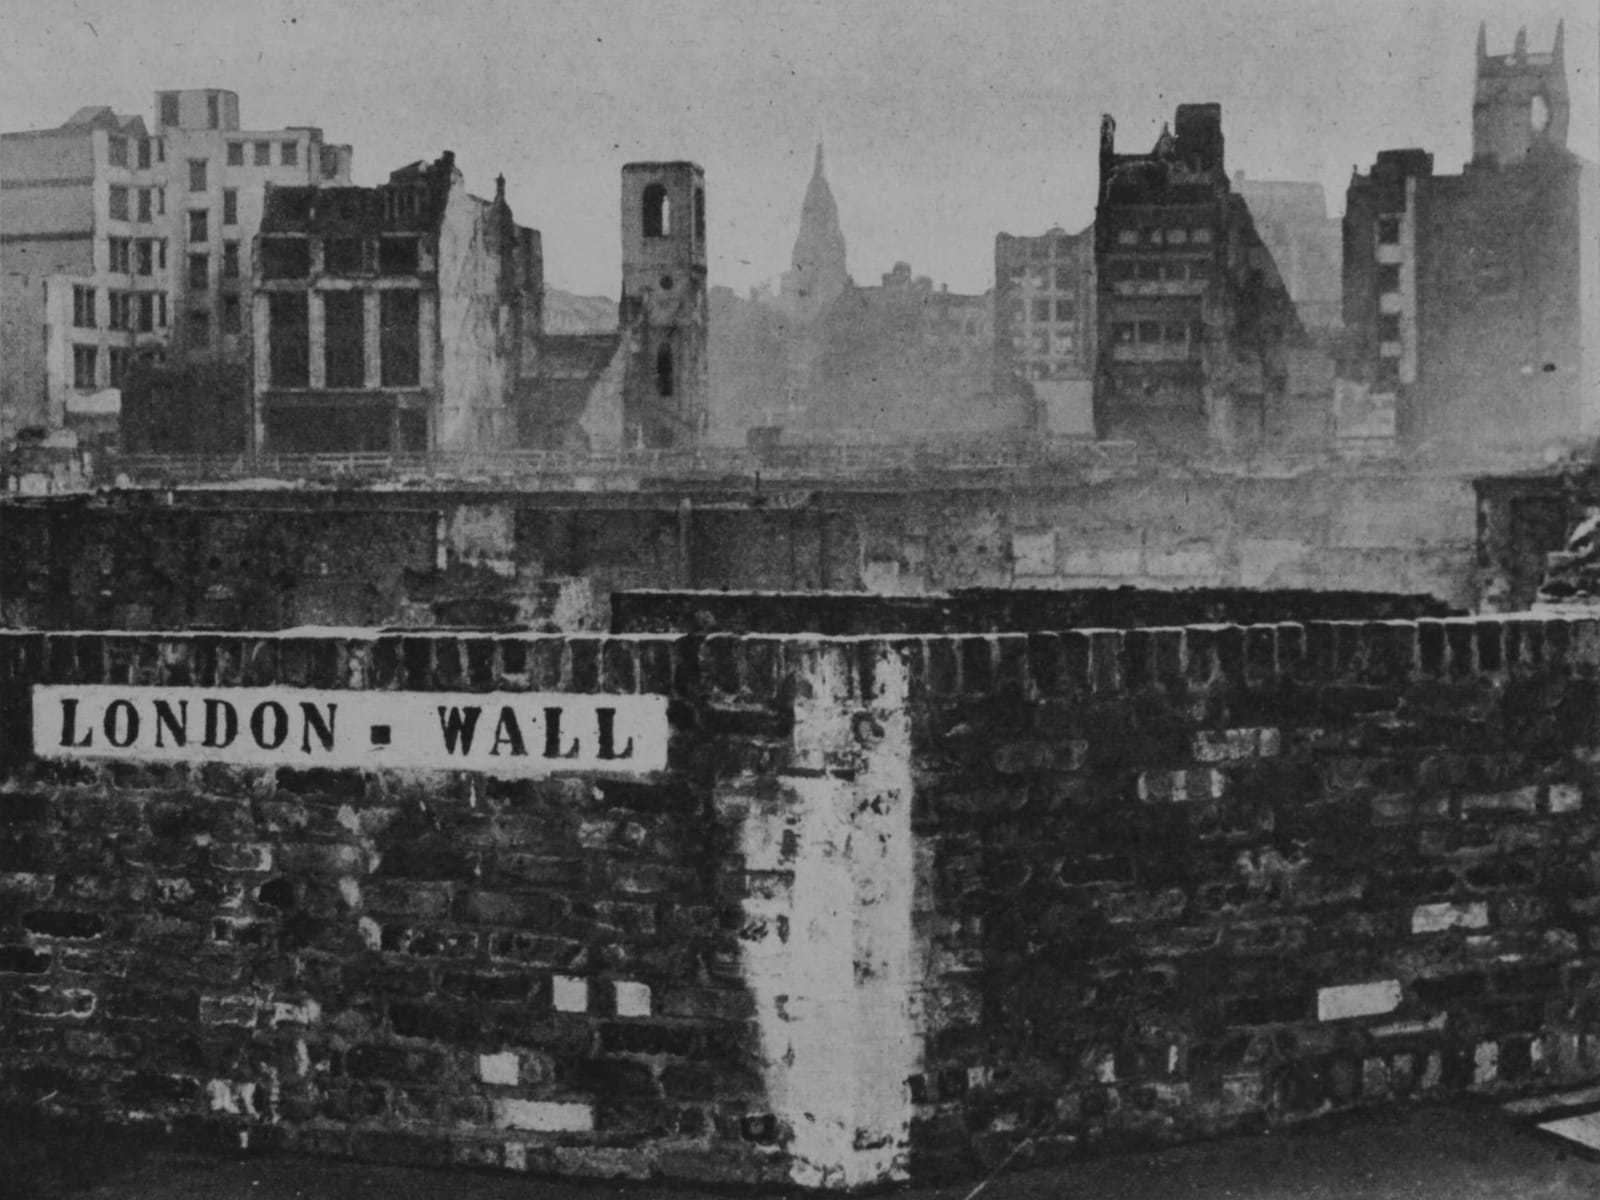 A low wall with a stencilled sign reading "London Wall" is visible with the view above it consisting of destroyed and badly damaged buildings as far as the eye can see.